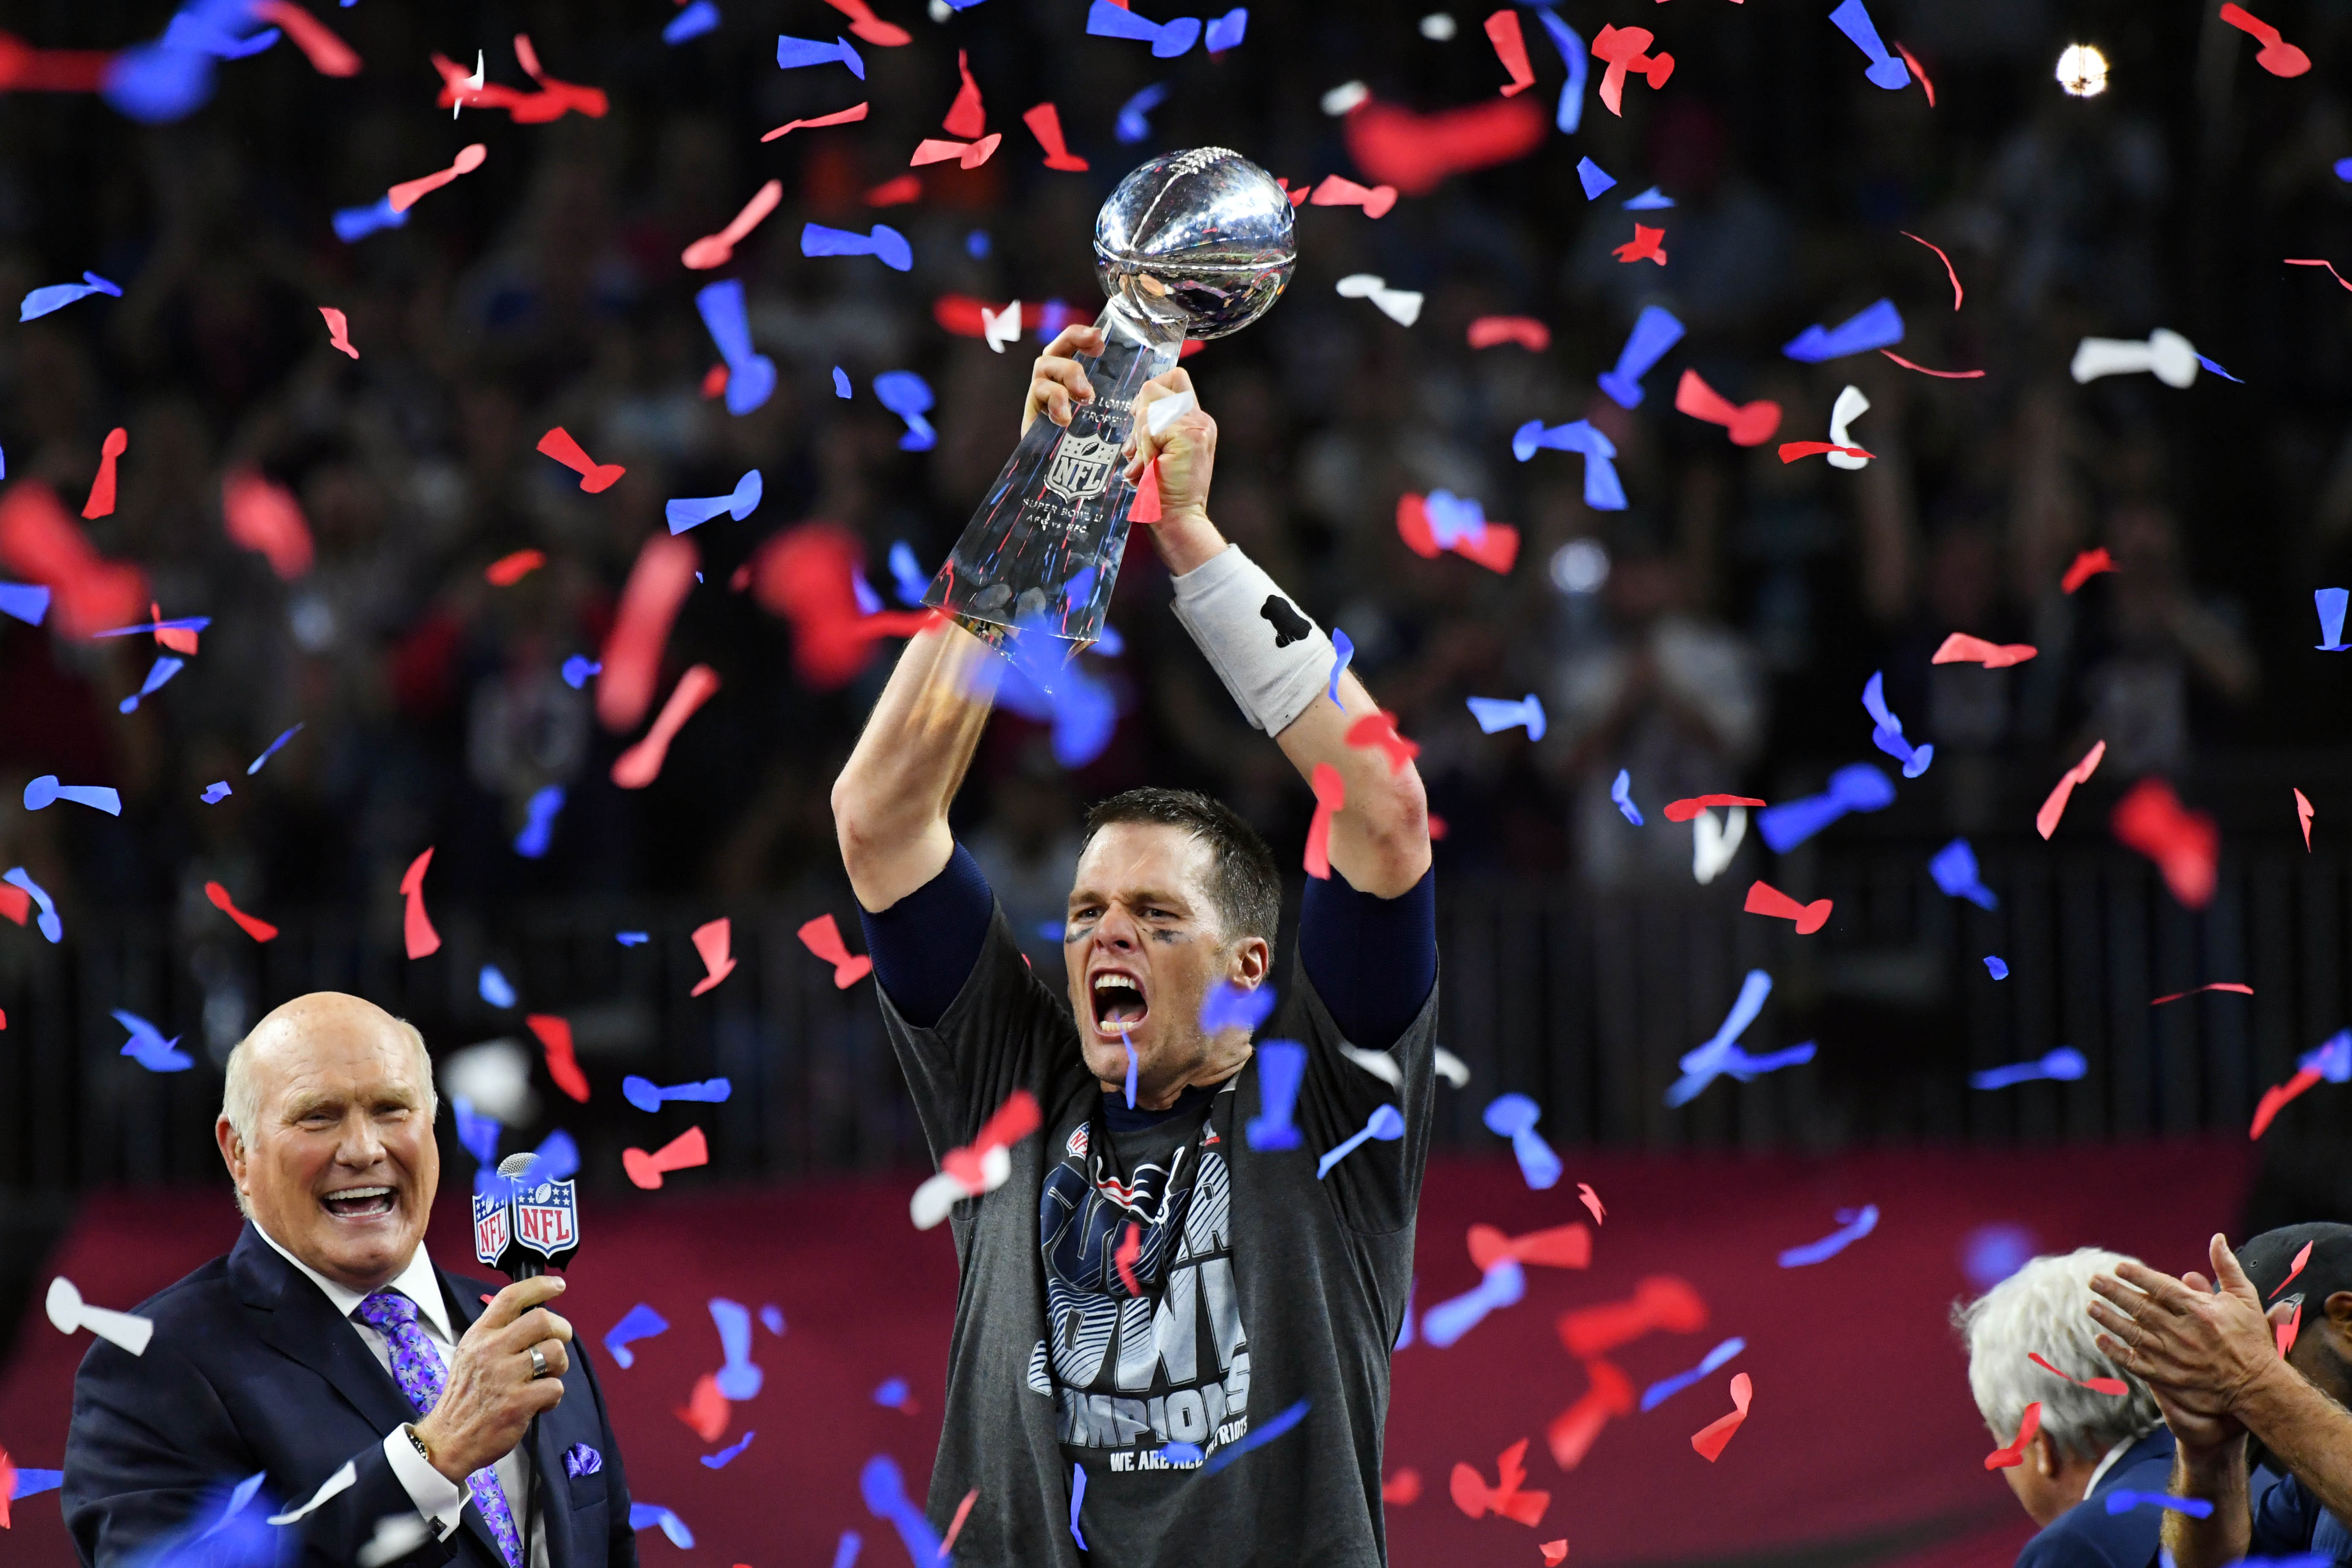 Tom Brady cements place in history with SB LI comeback - Sports